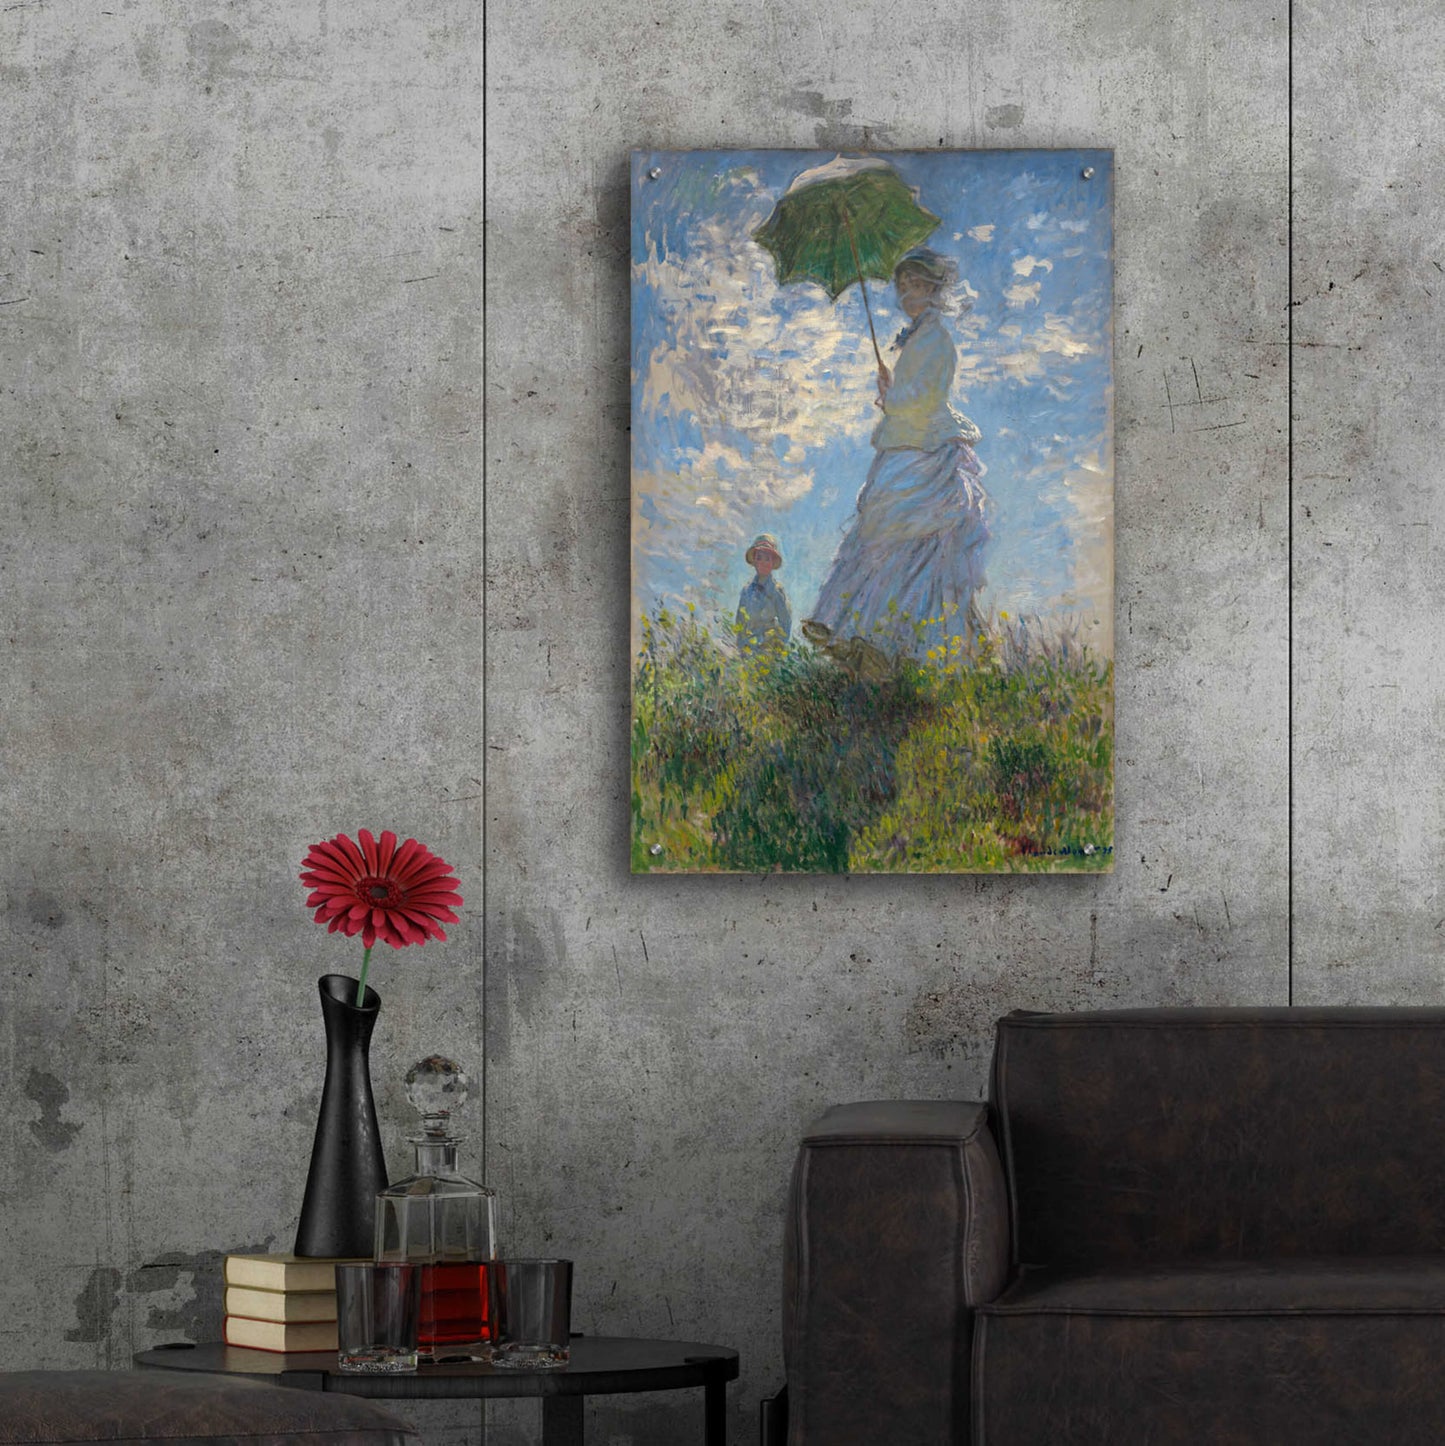 Epic Art 'Woman With A Parasol' by Claude Monet, Acrylic Glass Wall Art,24x36